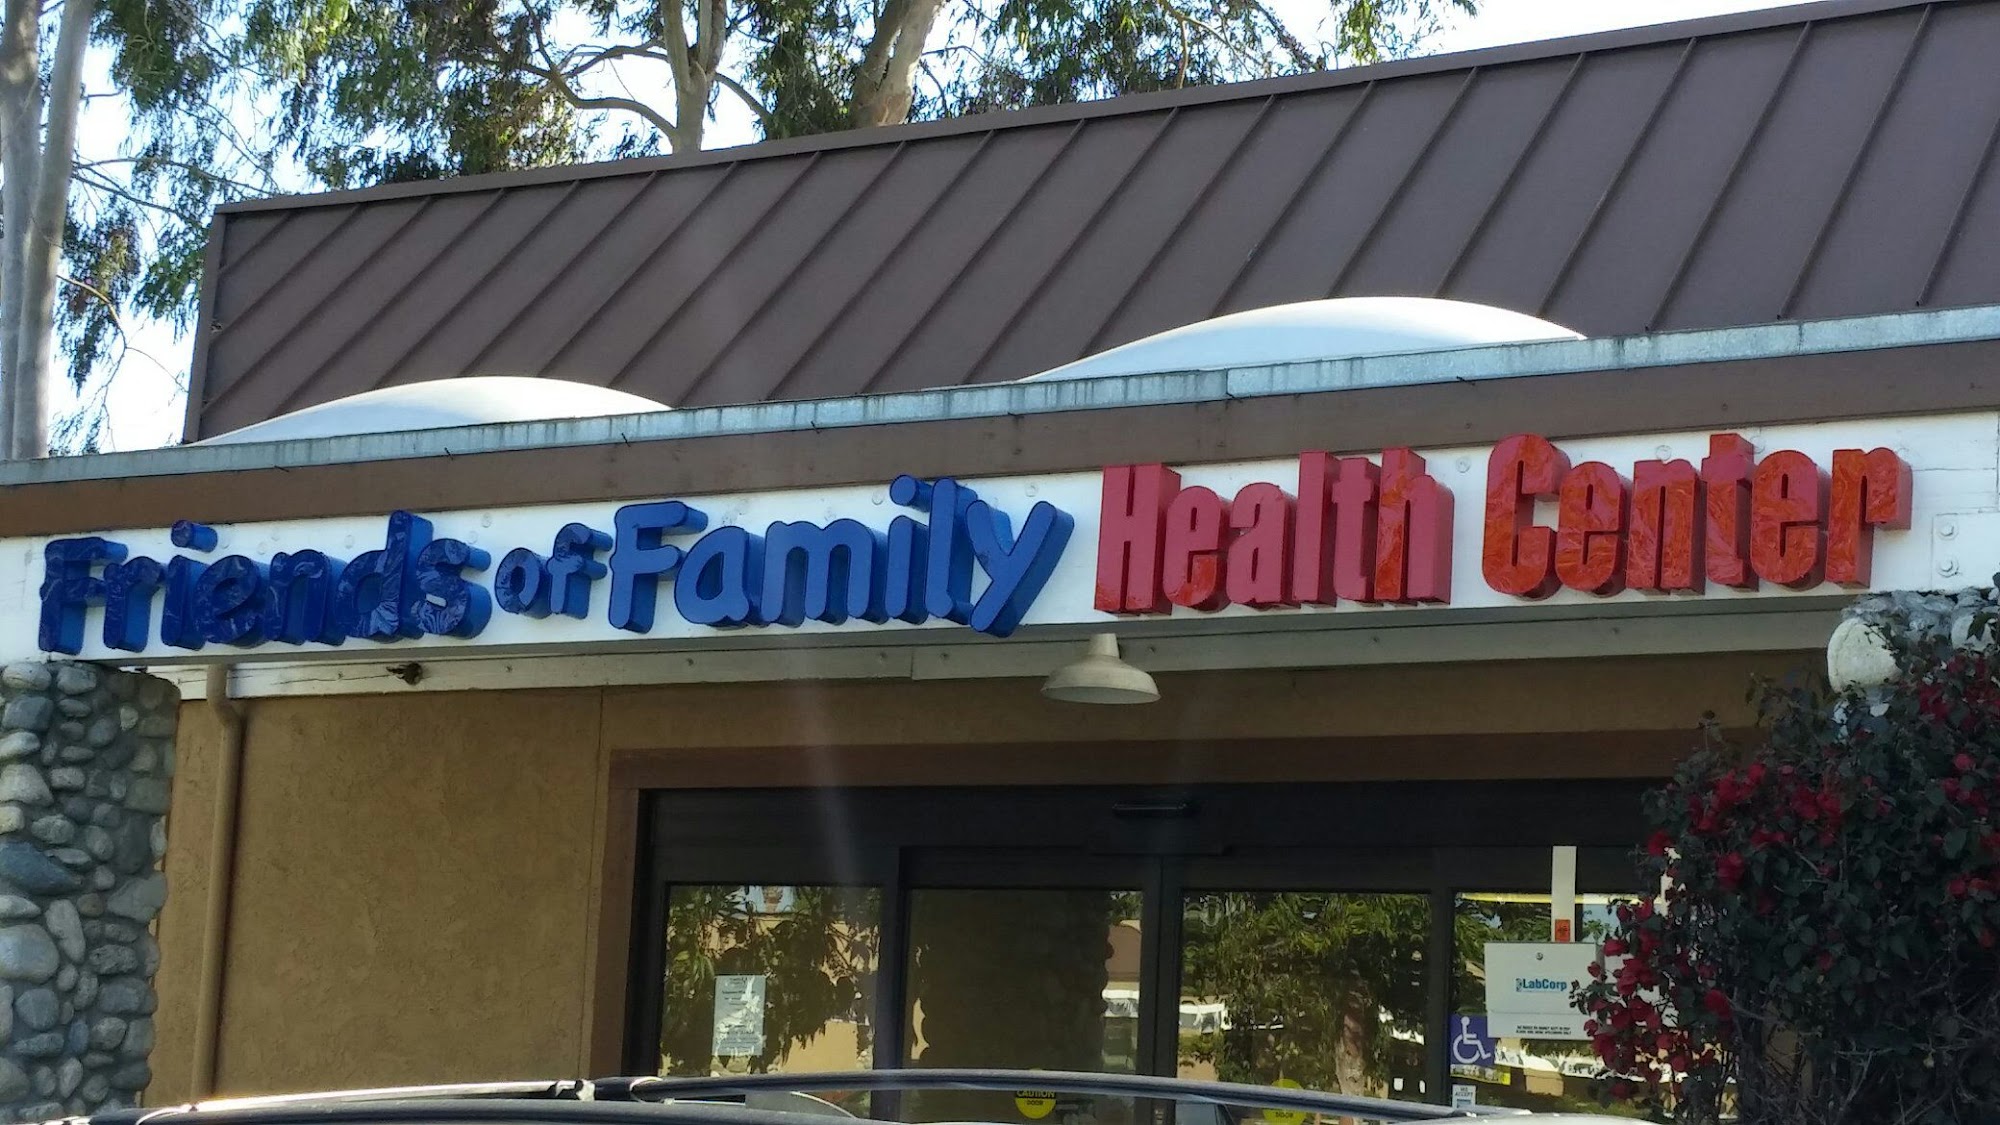 Friends of Family Health Center